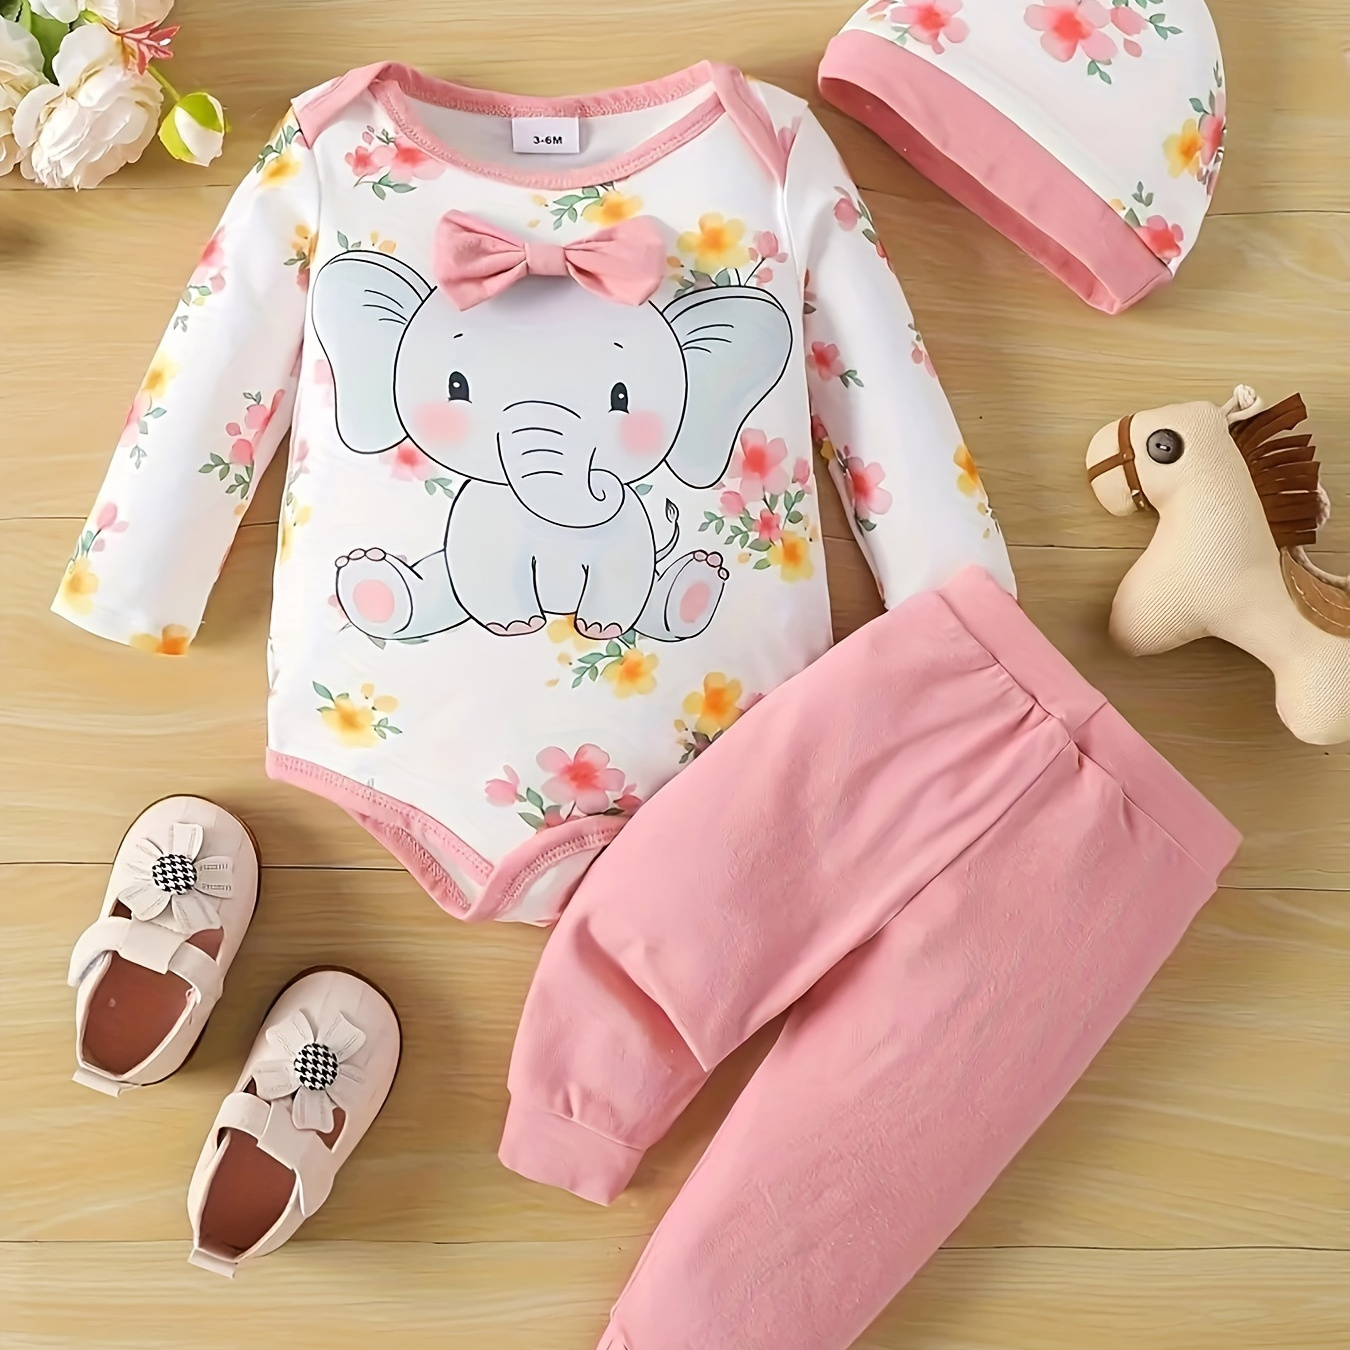 

2pcs Baby's Bowknot Decor Cartoon Elephant Print Bodysuit & Hat & Solid Color Pants, Toddler & Infant Girl's Clothing Set For Spring Fall